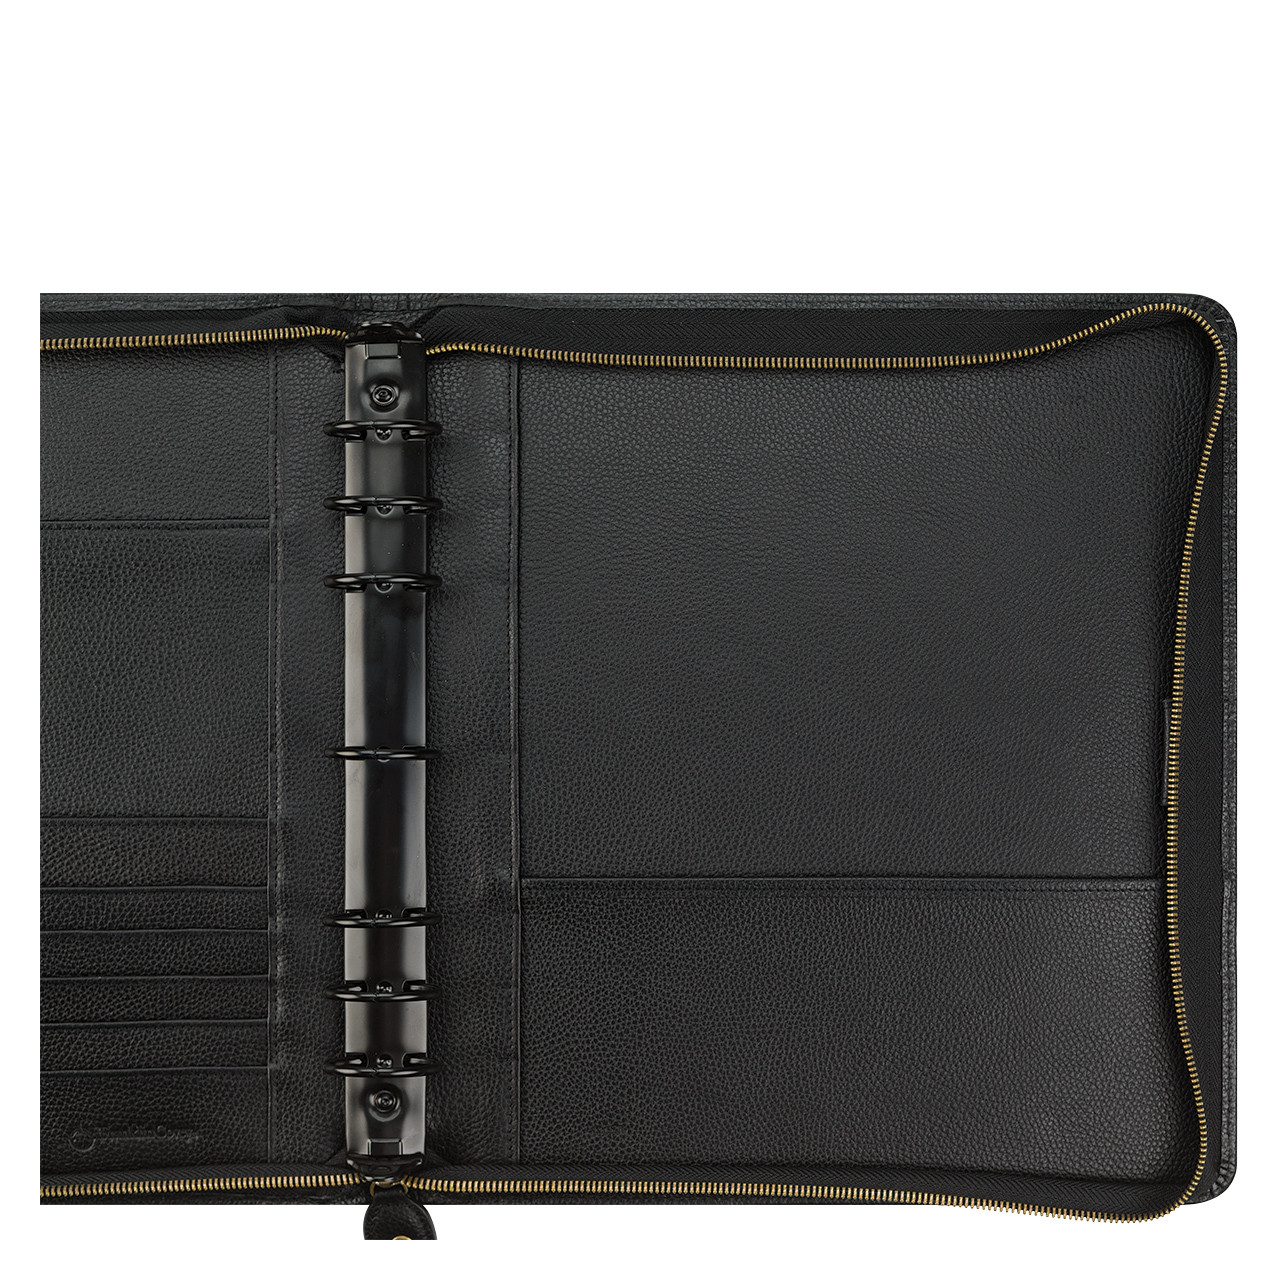 Franklin Covey Black Leather Zipped Organiser / Purse / Wallet